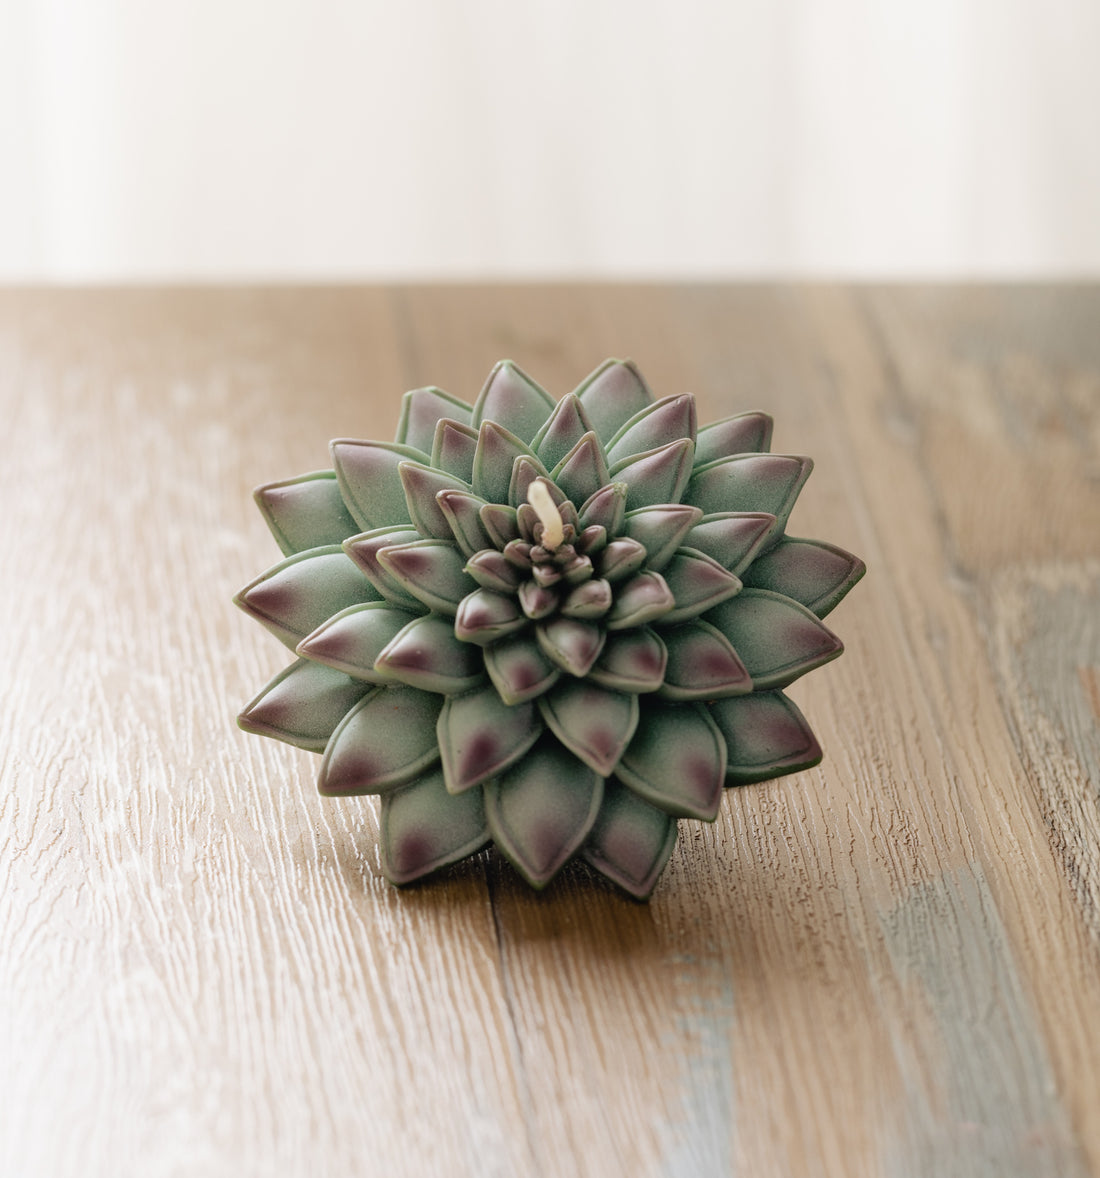 The beauty of Realistic Succulent Candle from Southlake Gifts.